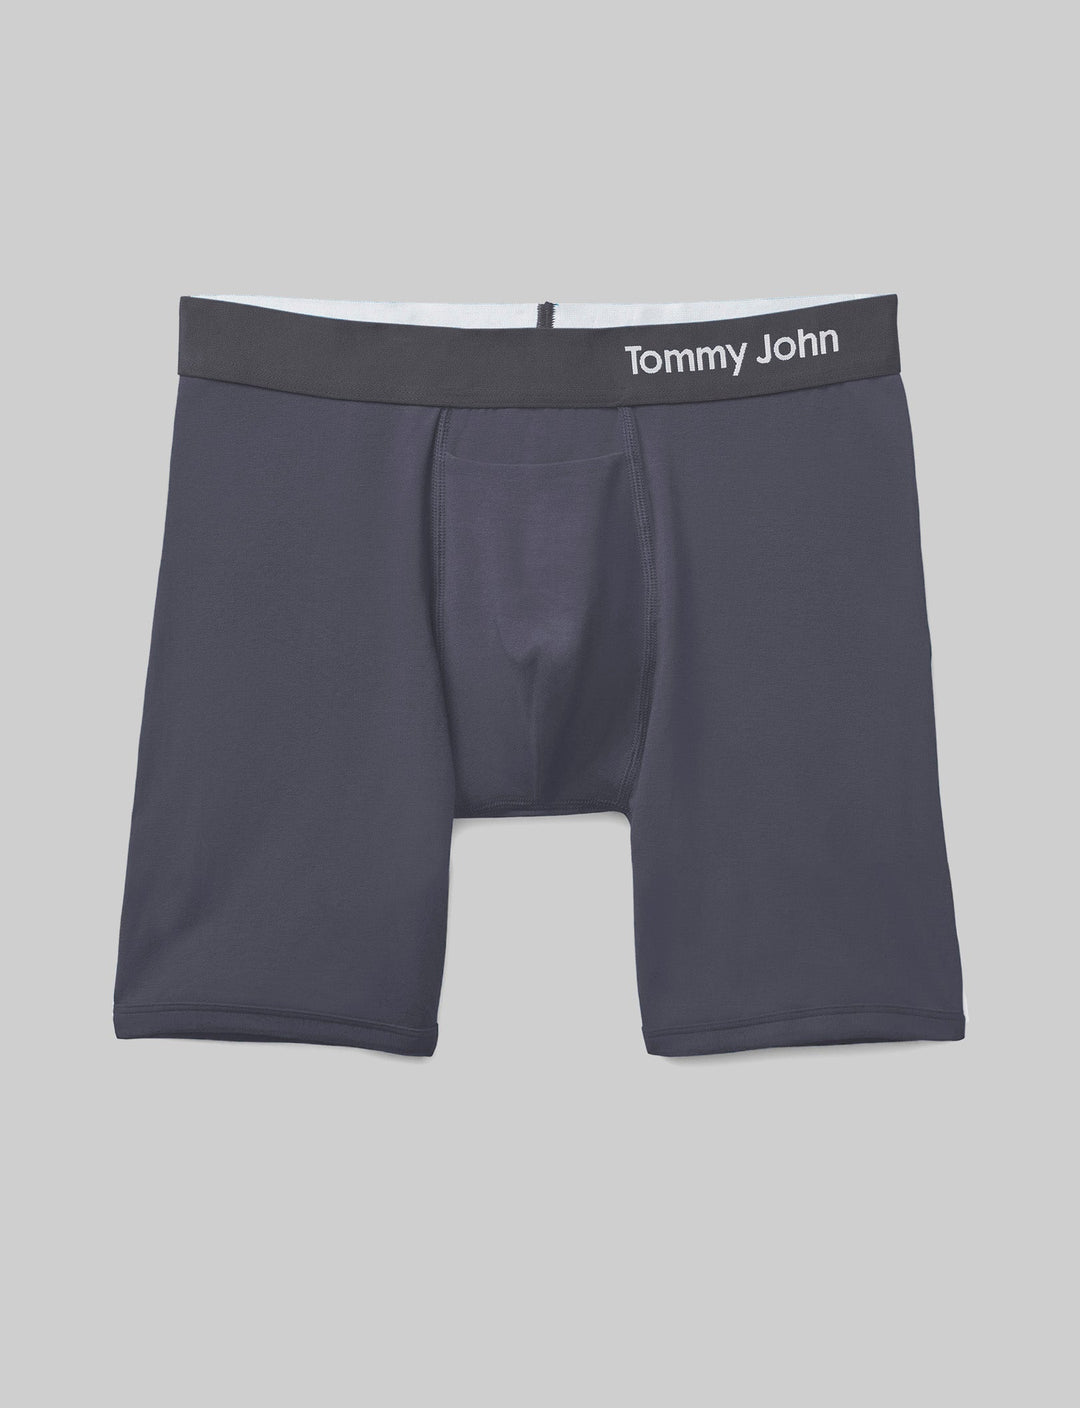 Cool Cotton 6" Boxer Brief in Iron Grey